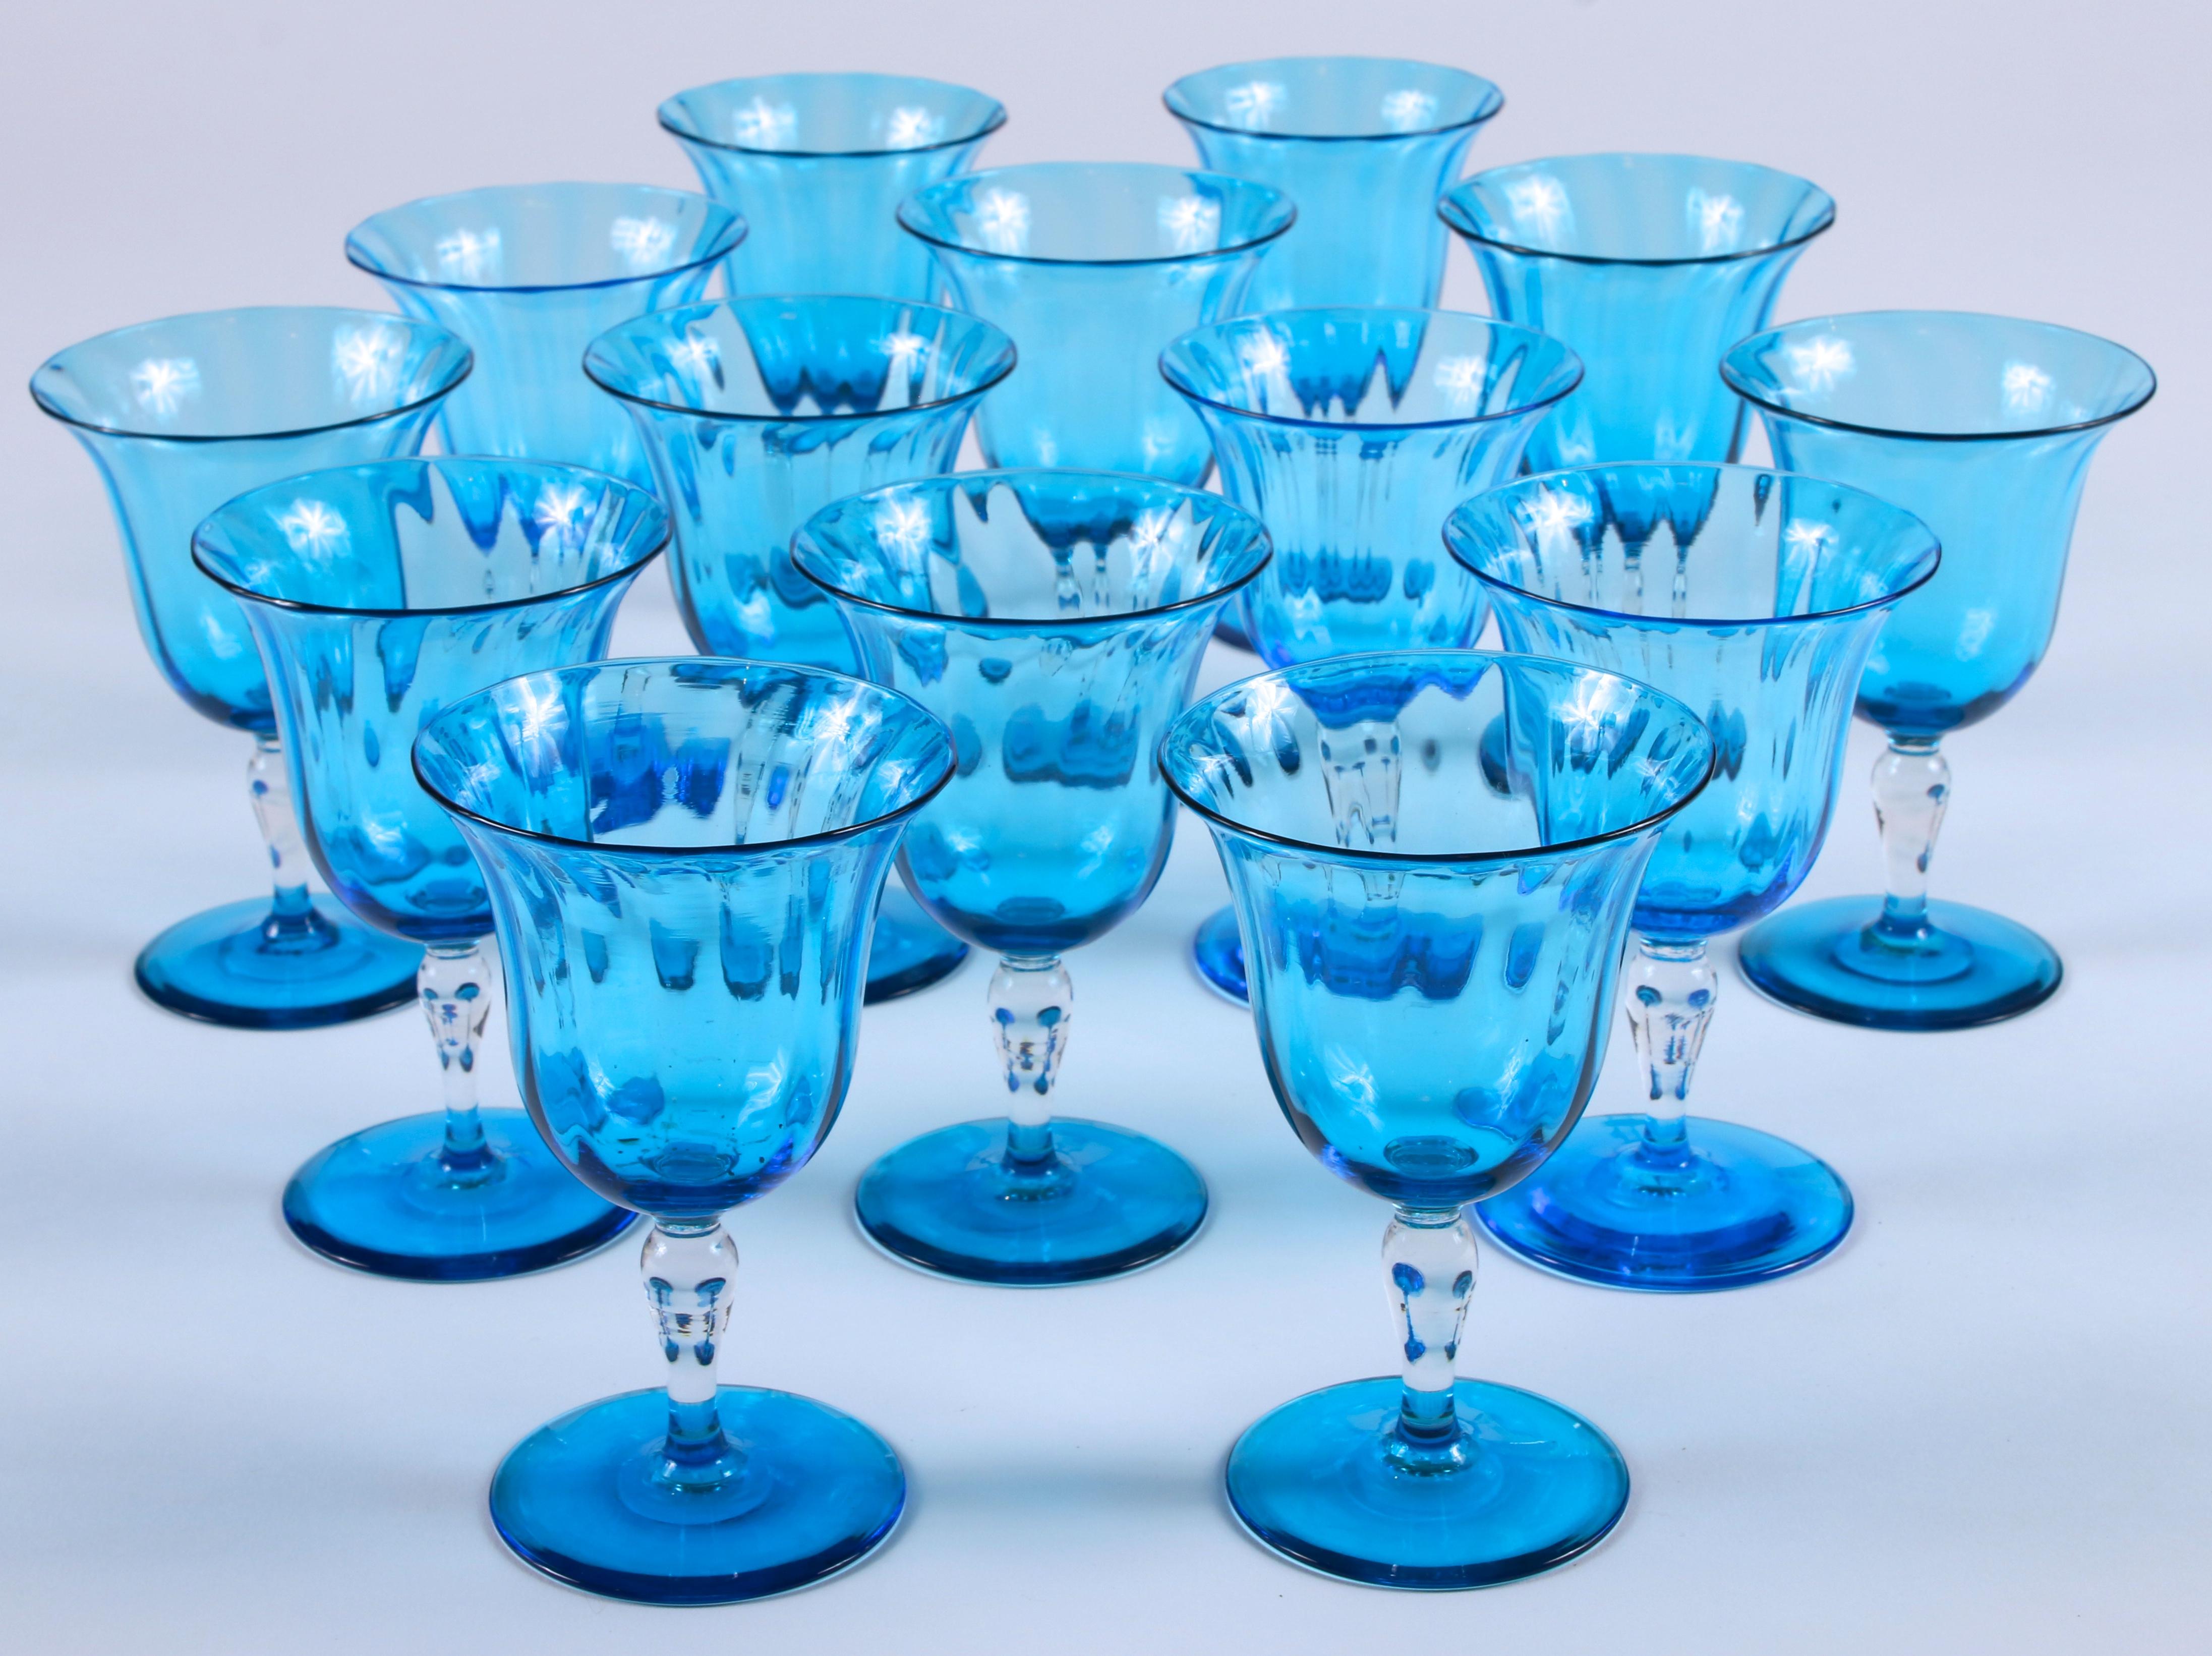 This Steuben optic rib set has been hand-blown in the famous Steuben 